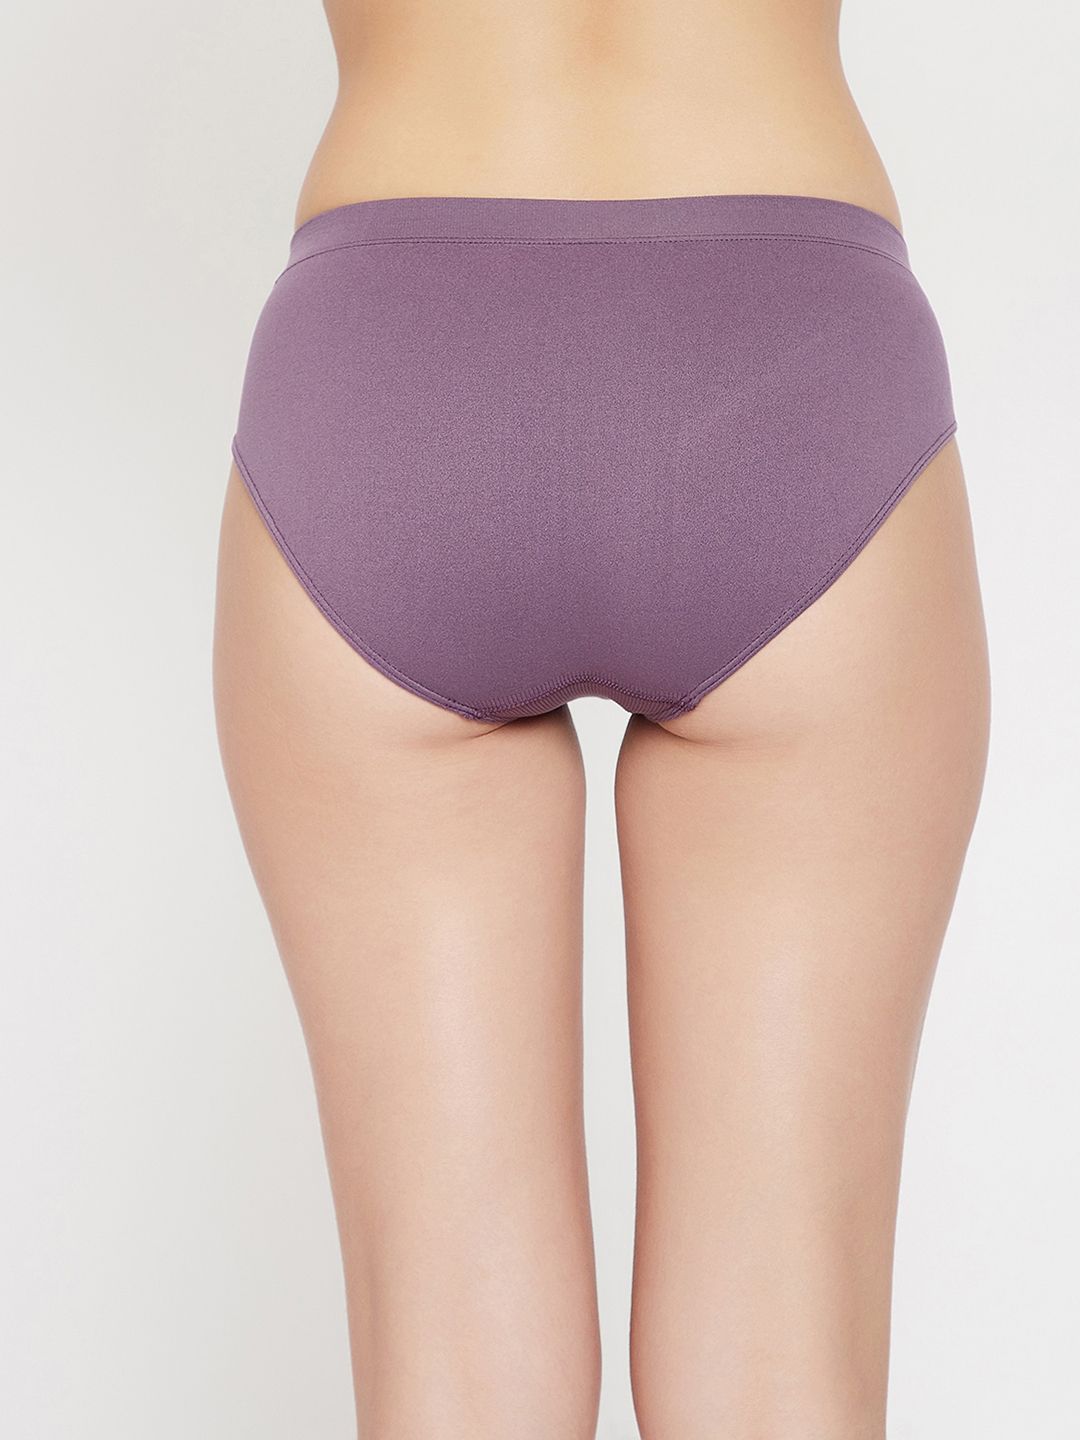 Shop a Variety of Women's Assorted Panties – C9 Airwear